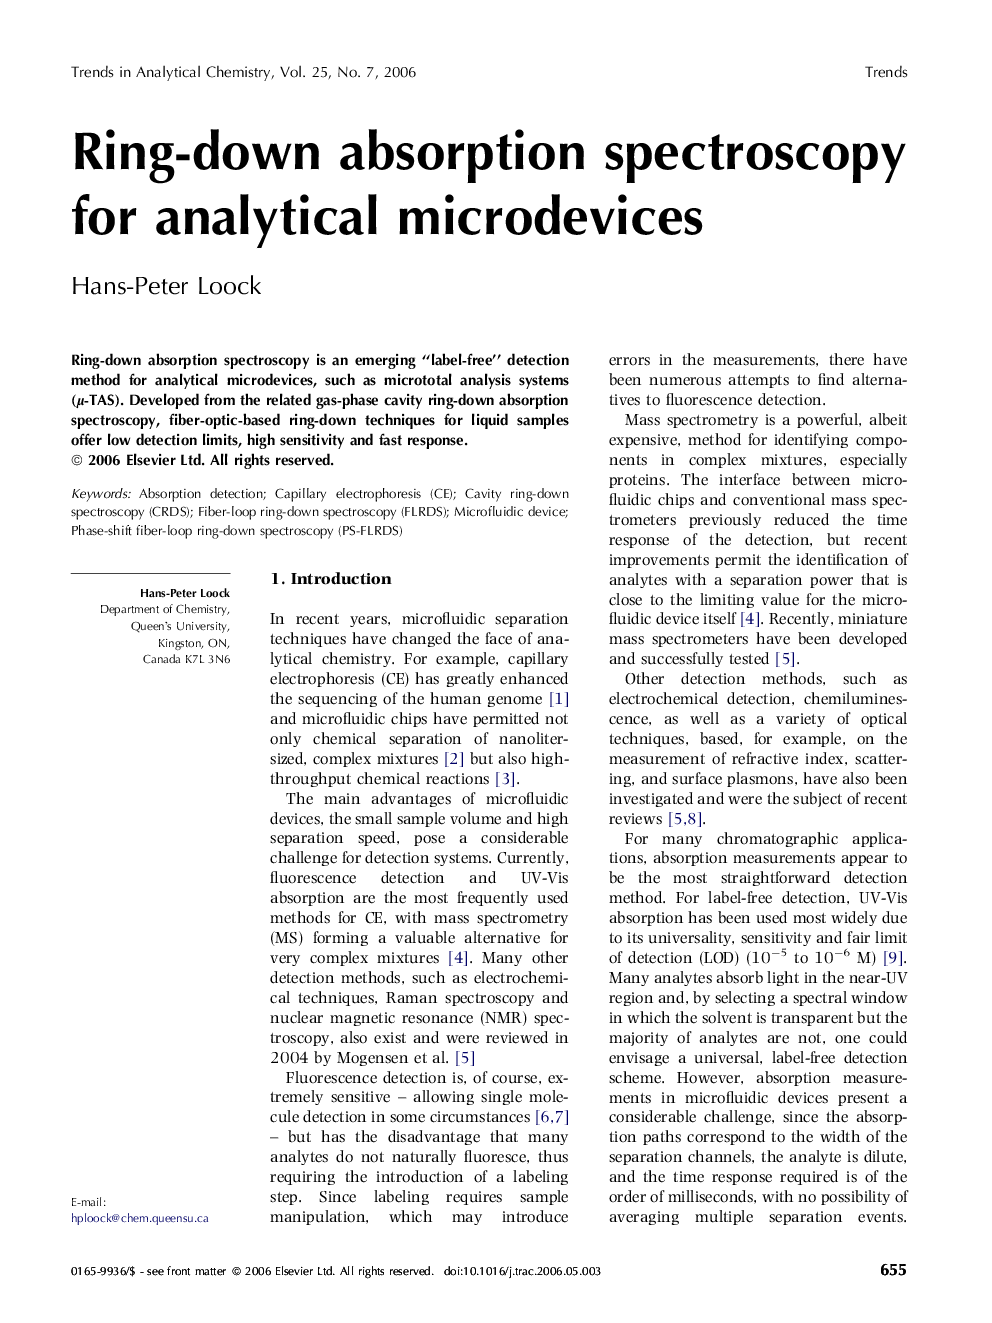 Ring-down absorption spectroscopy for analytical microdevices